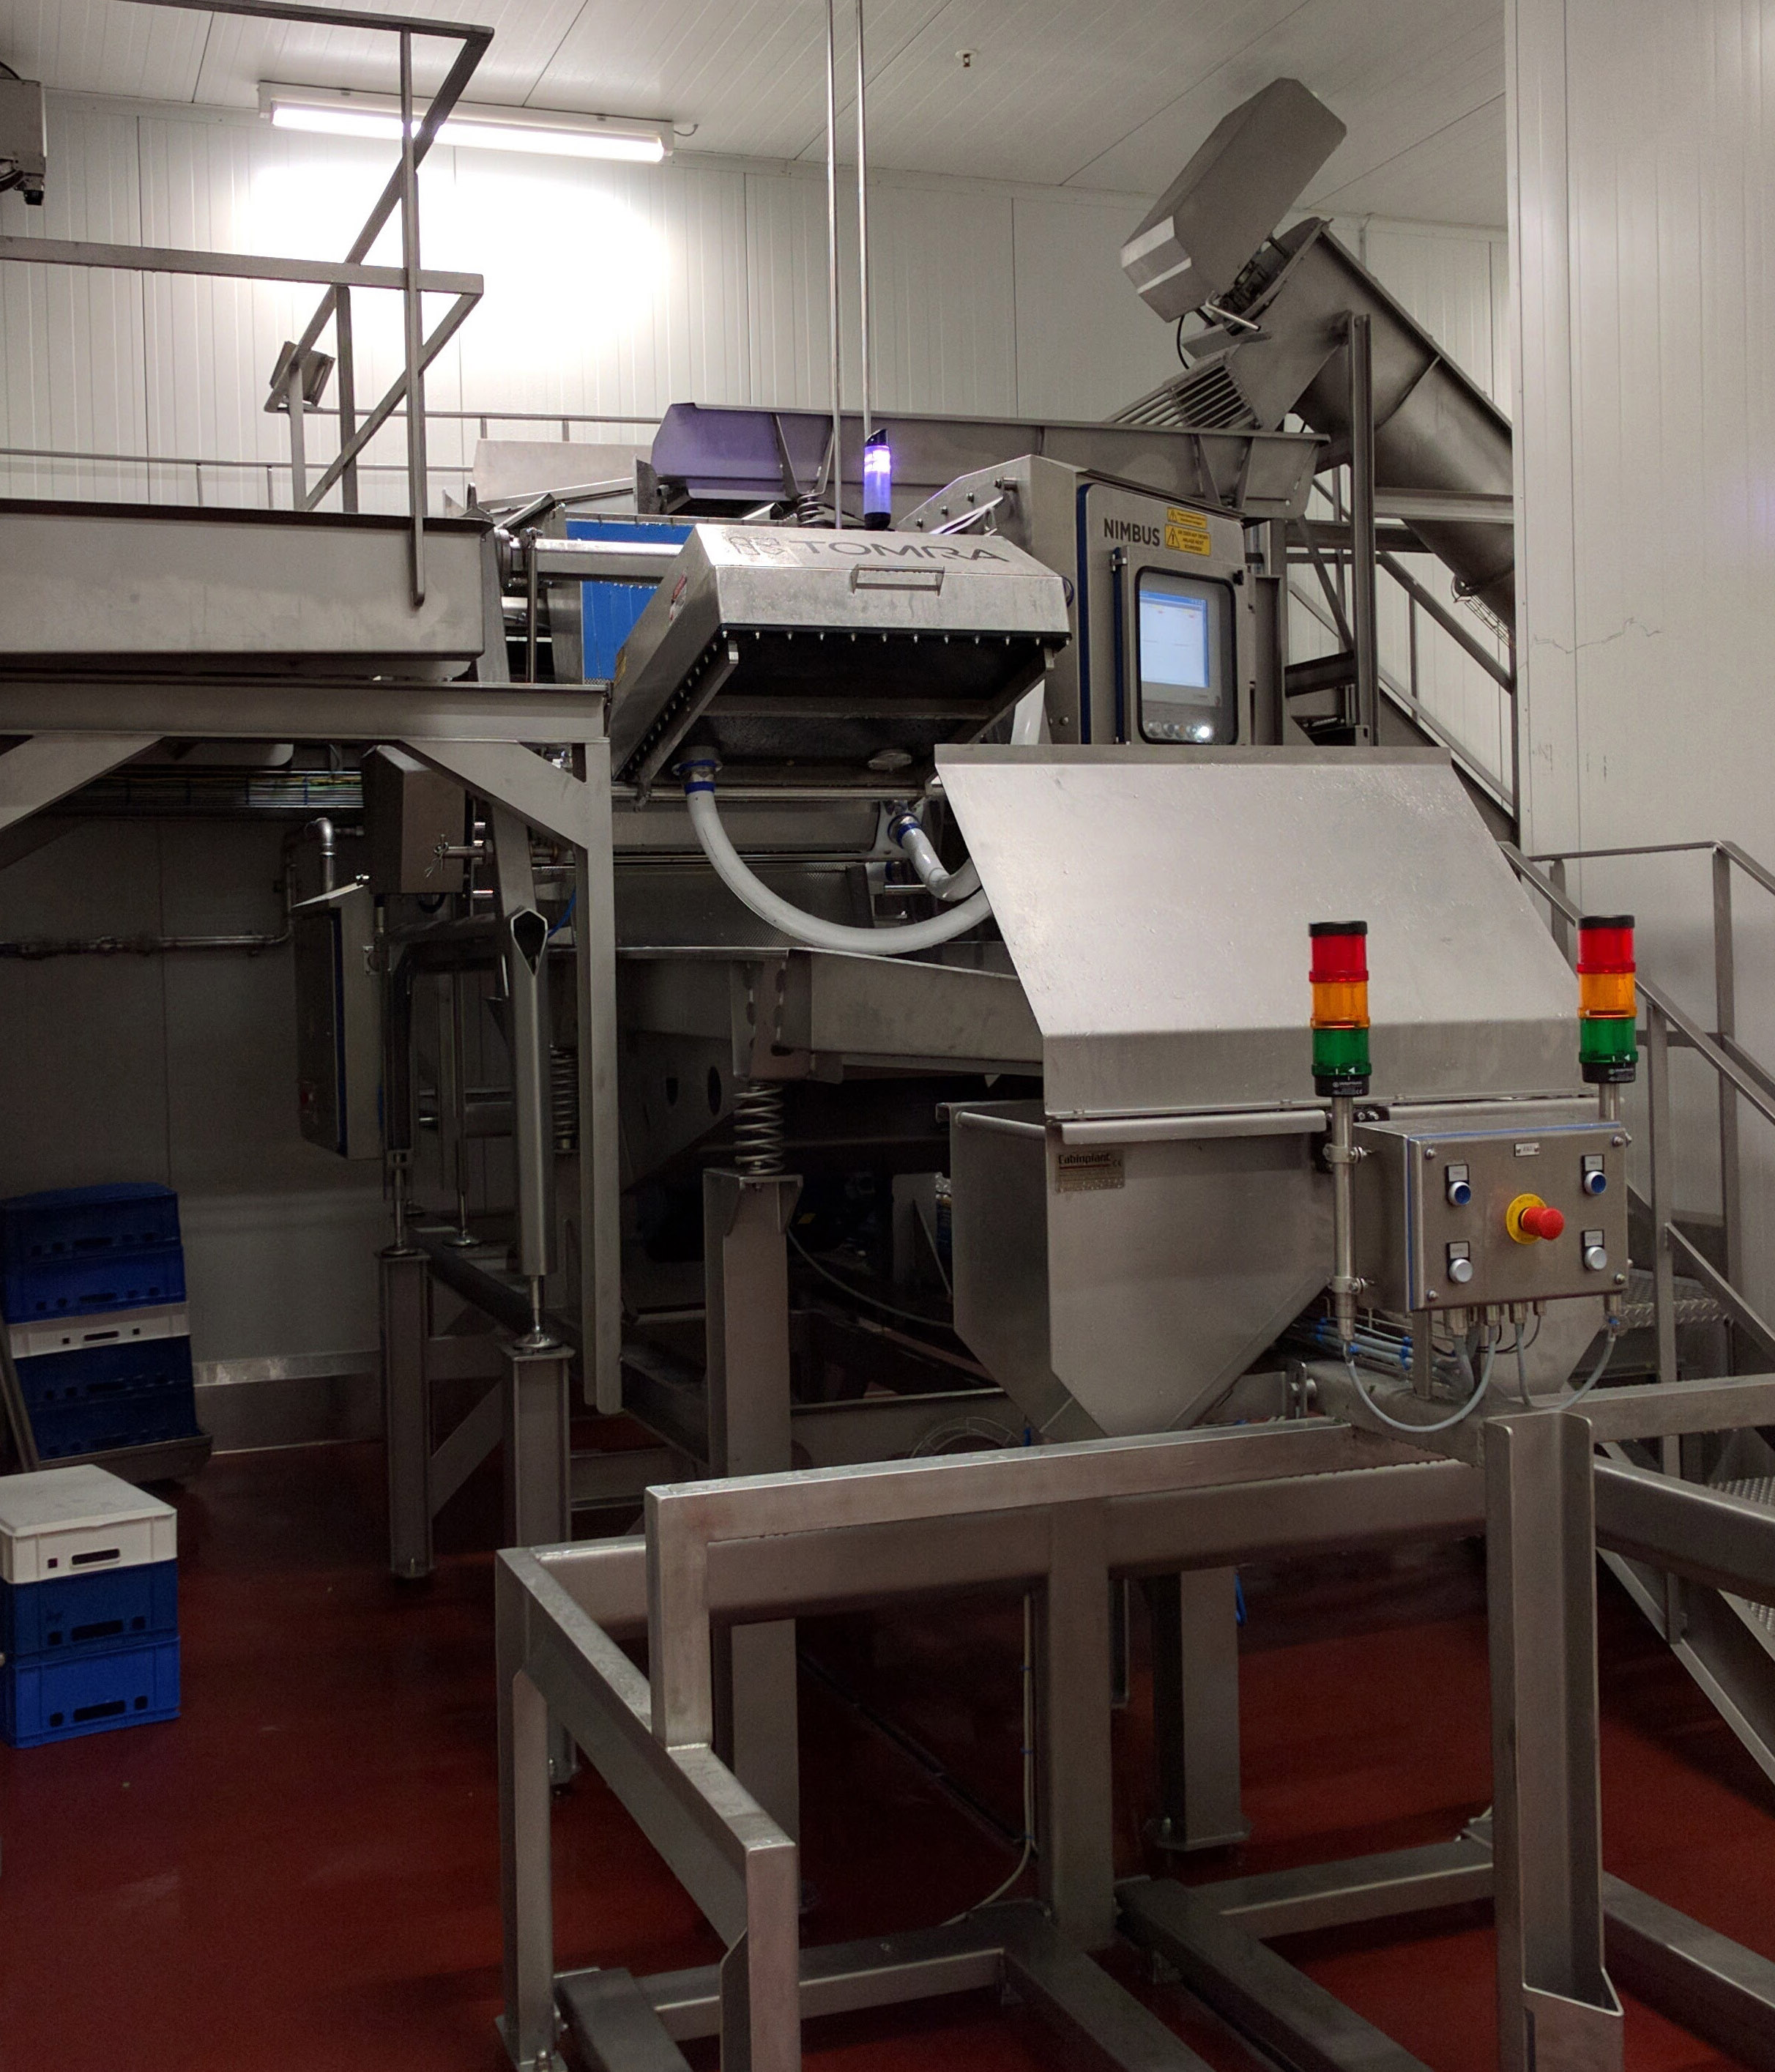 NESTLÉ’S PIZZA BRANDS FIND THAT TOMRA FOOD’S SMART SORT TECHNOLOGY IS BEST FOR PROTECTING FOOD SAFETY